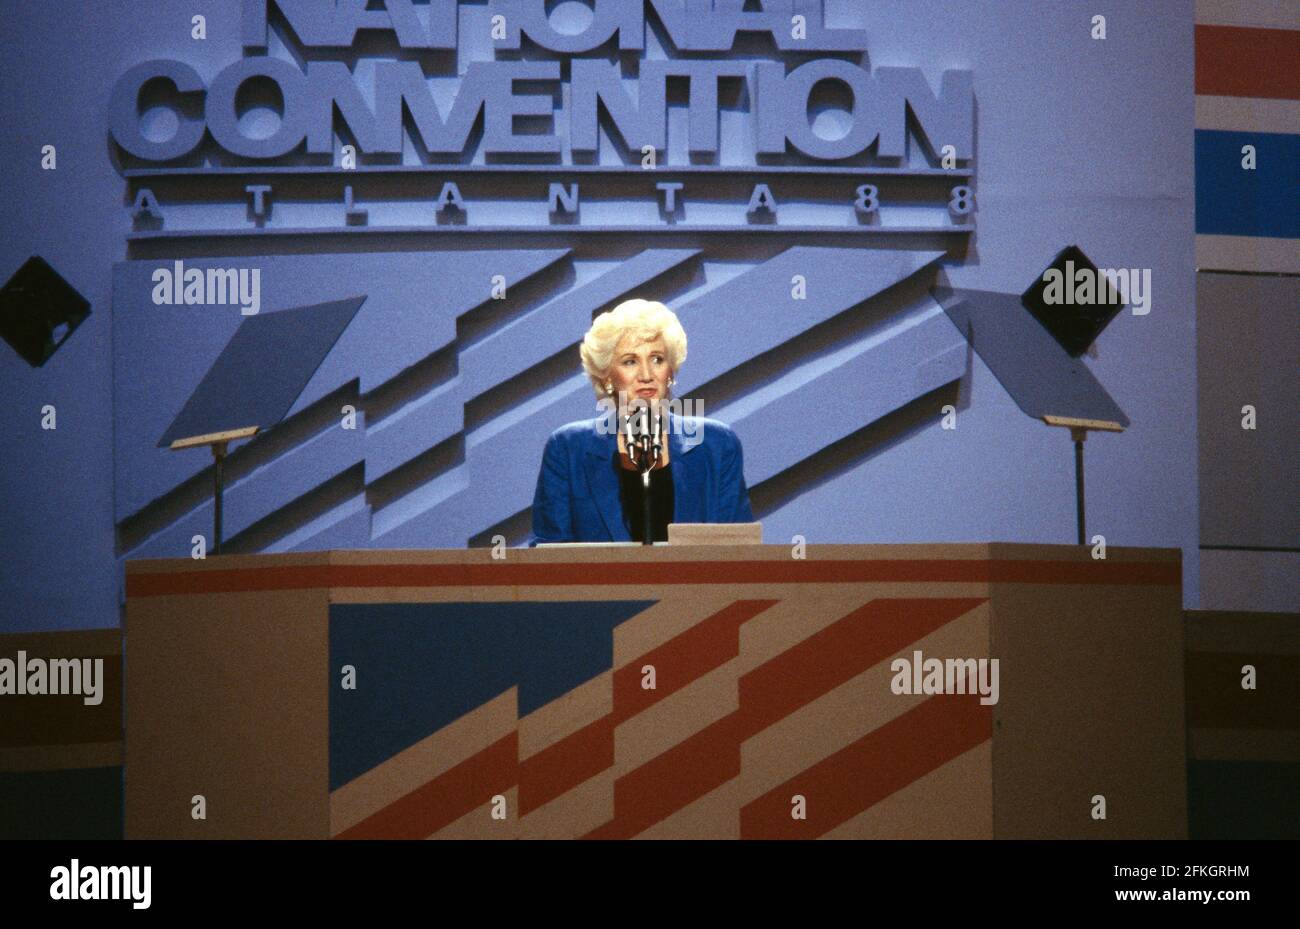 Oscar Award-winning actress Olympia Dukakis, makes remarks supporting her cousin, Governor Michael Dukakis (Democrat of Massachusetts), the 1988 Democratic Party nominee for President of the United States, at the 1988 Democratic National Convention in the Omni Coliseum in Atlanta, Georgia on July 21, 1988.Credit: Howard L. Sachs / CNP / MediaPunch Stock Photo